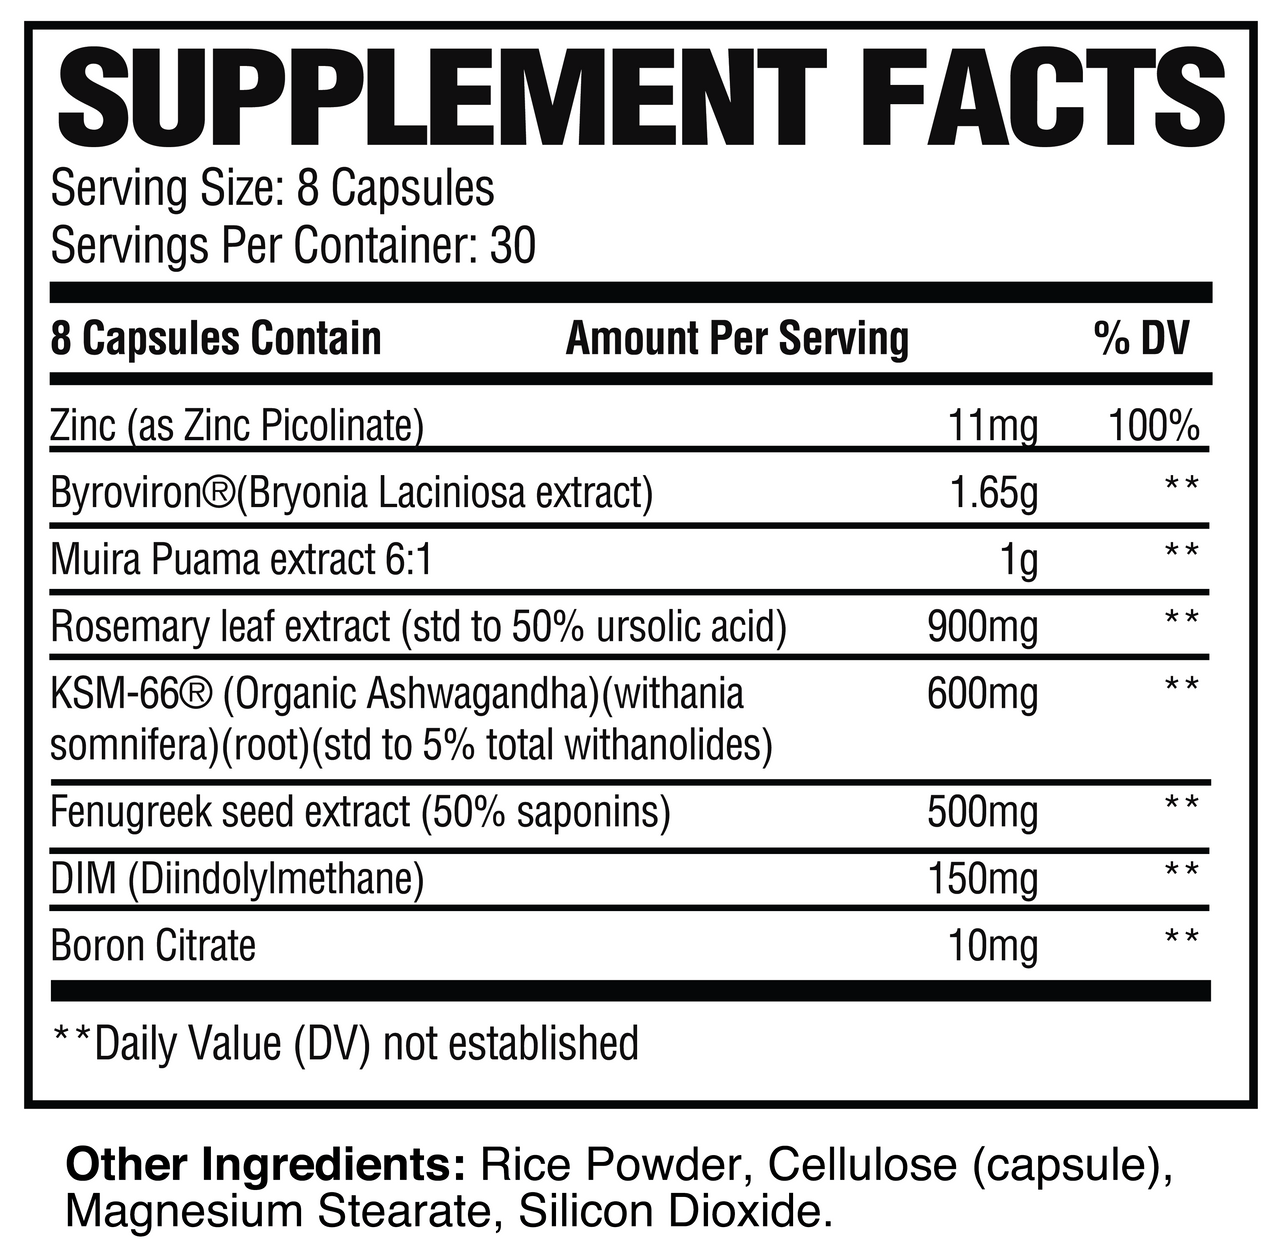 Raw Nutrition Raw Test Supplement Facts